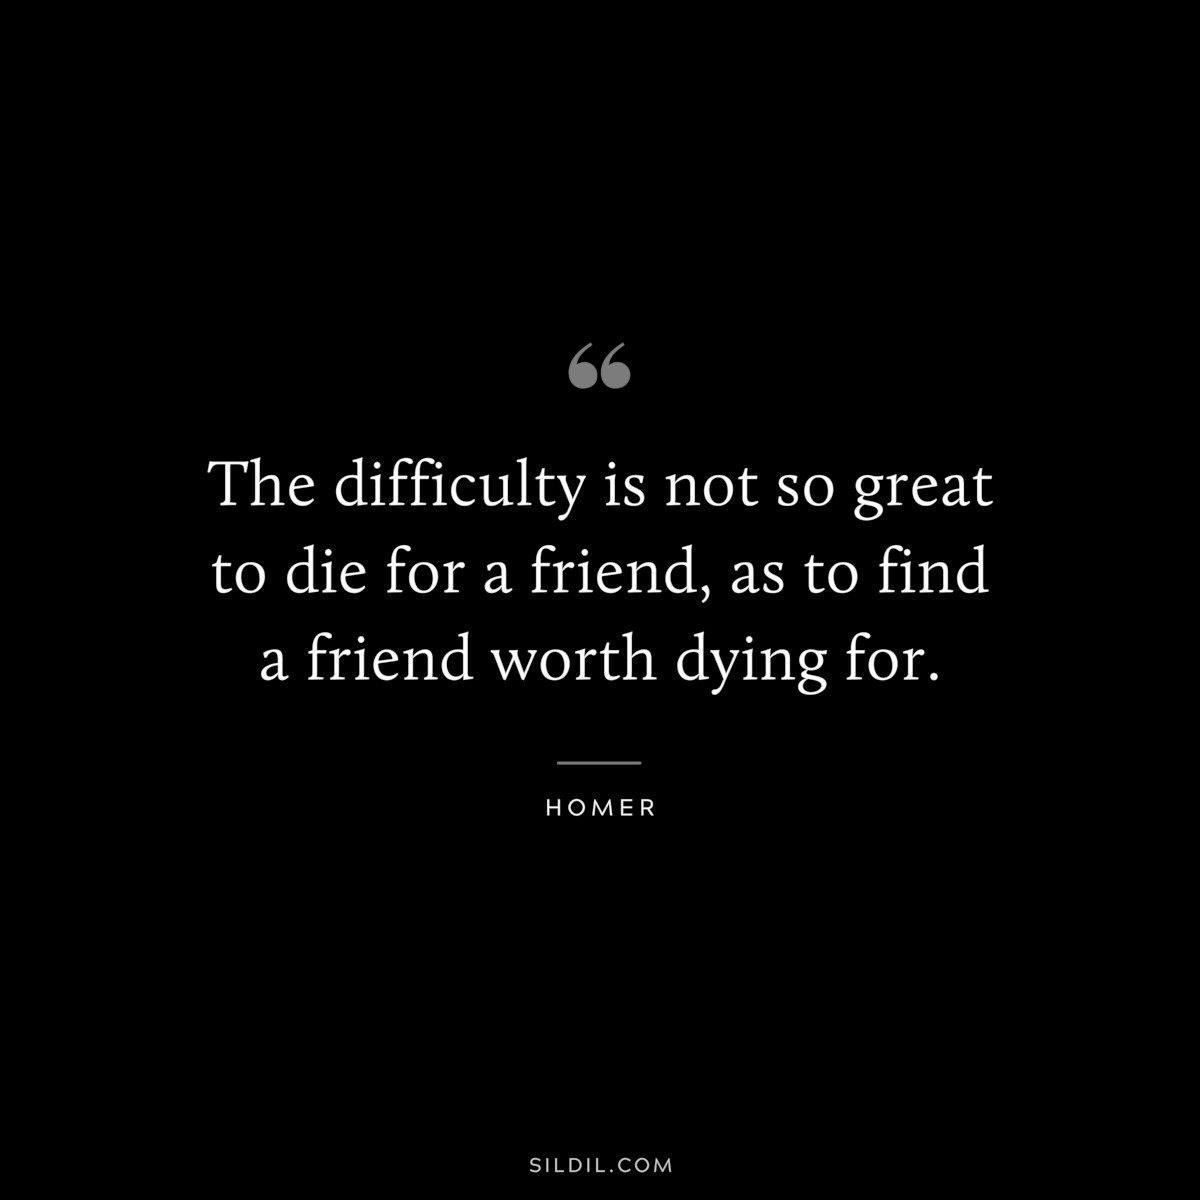 The difficulty is not so great to die for a friend, as to find a friend worth dying for. ― Homer